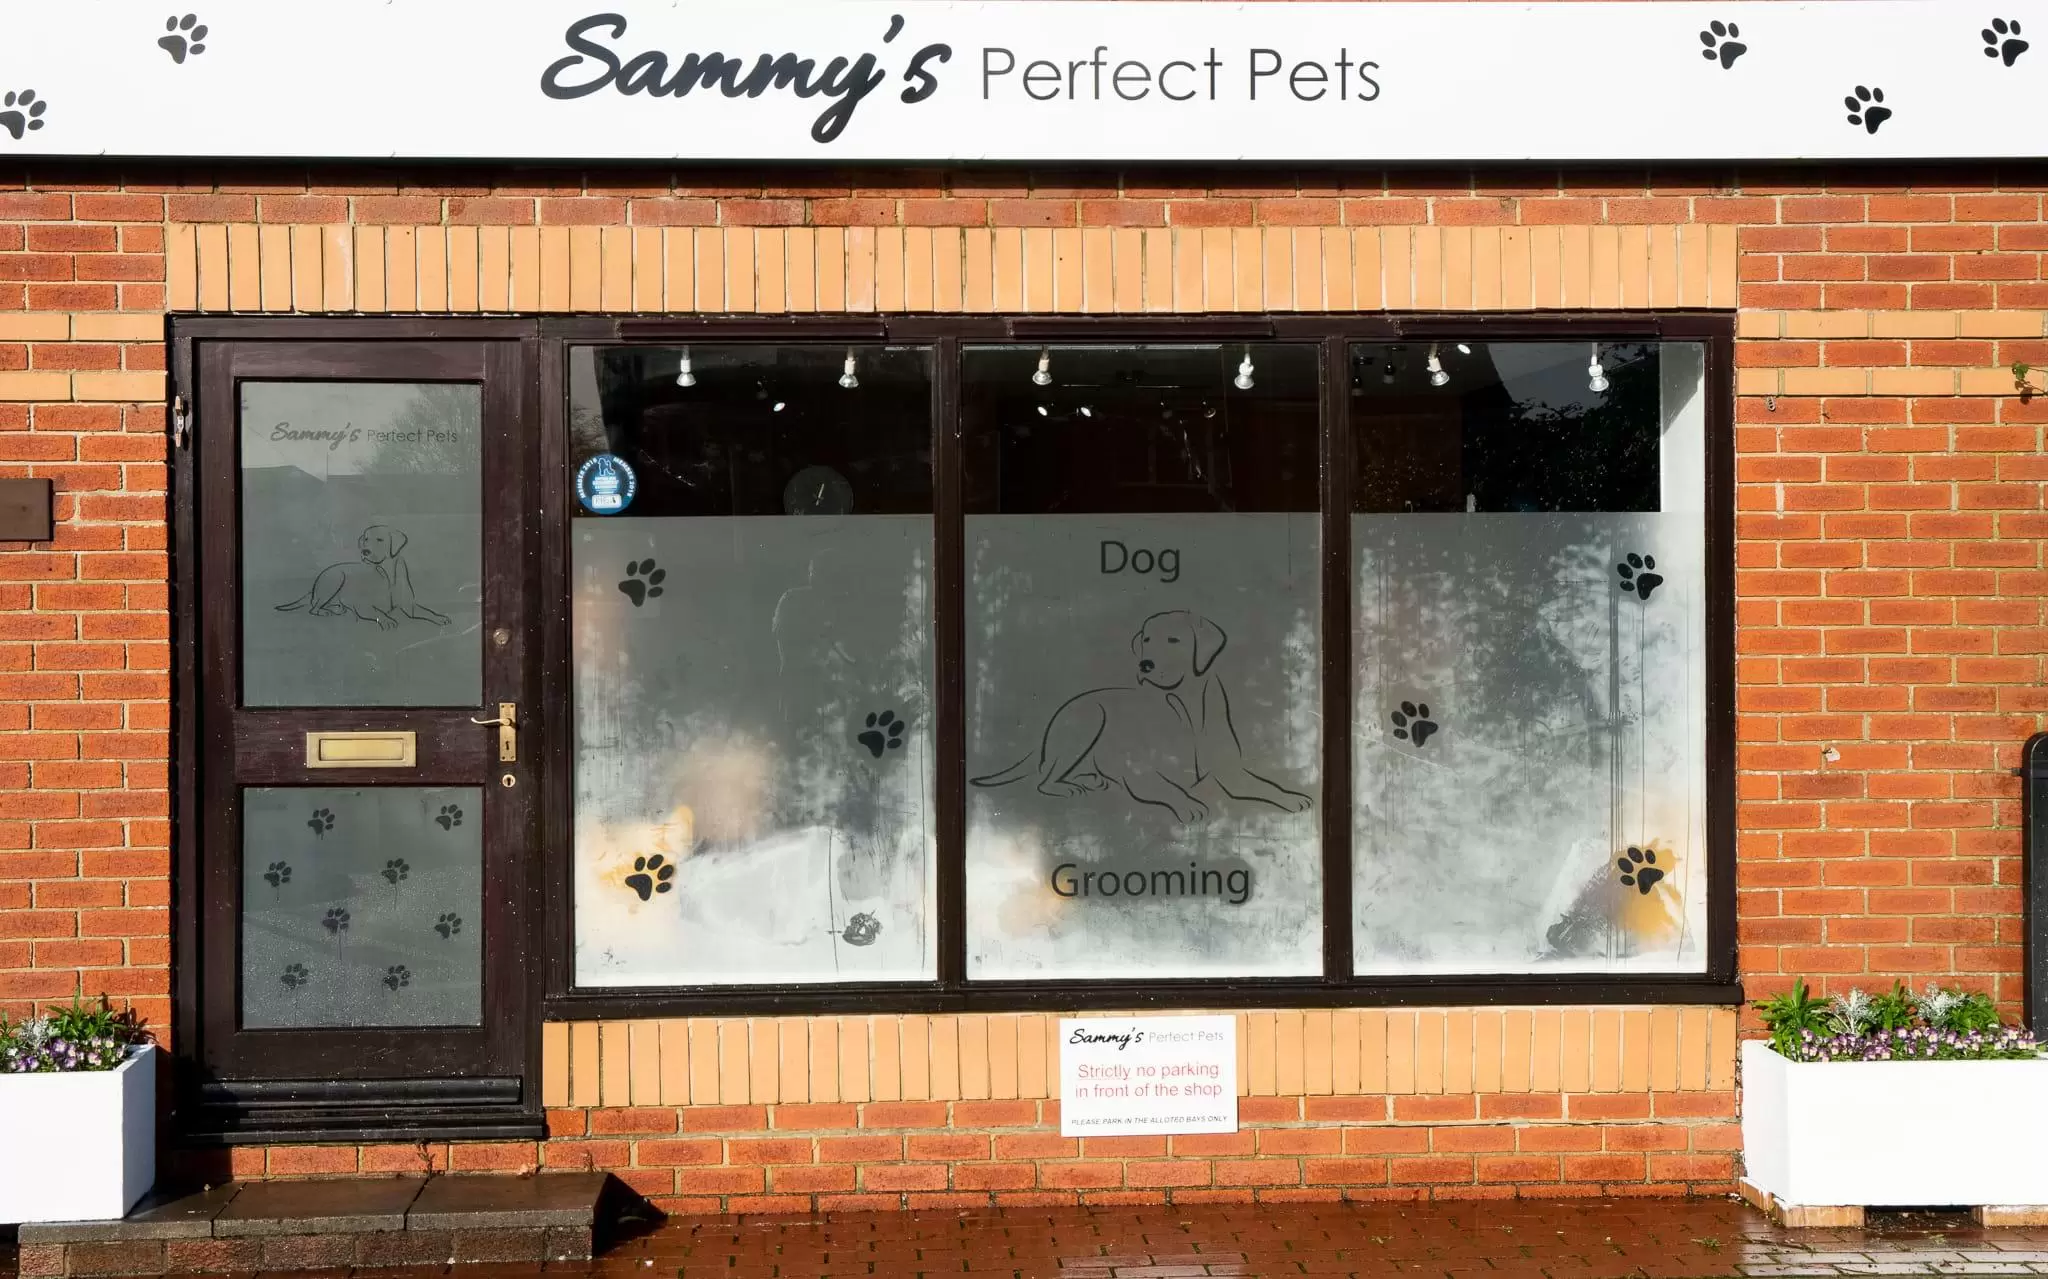 The store front of Sammy's Perfect Pets